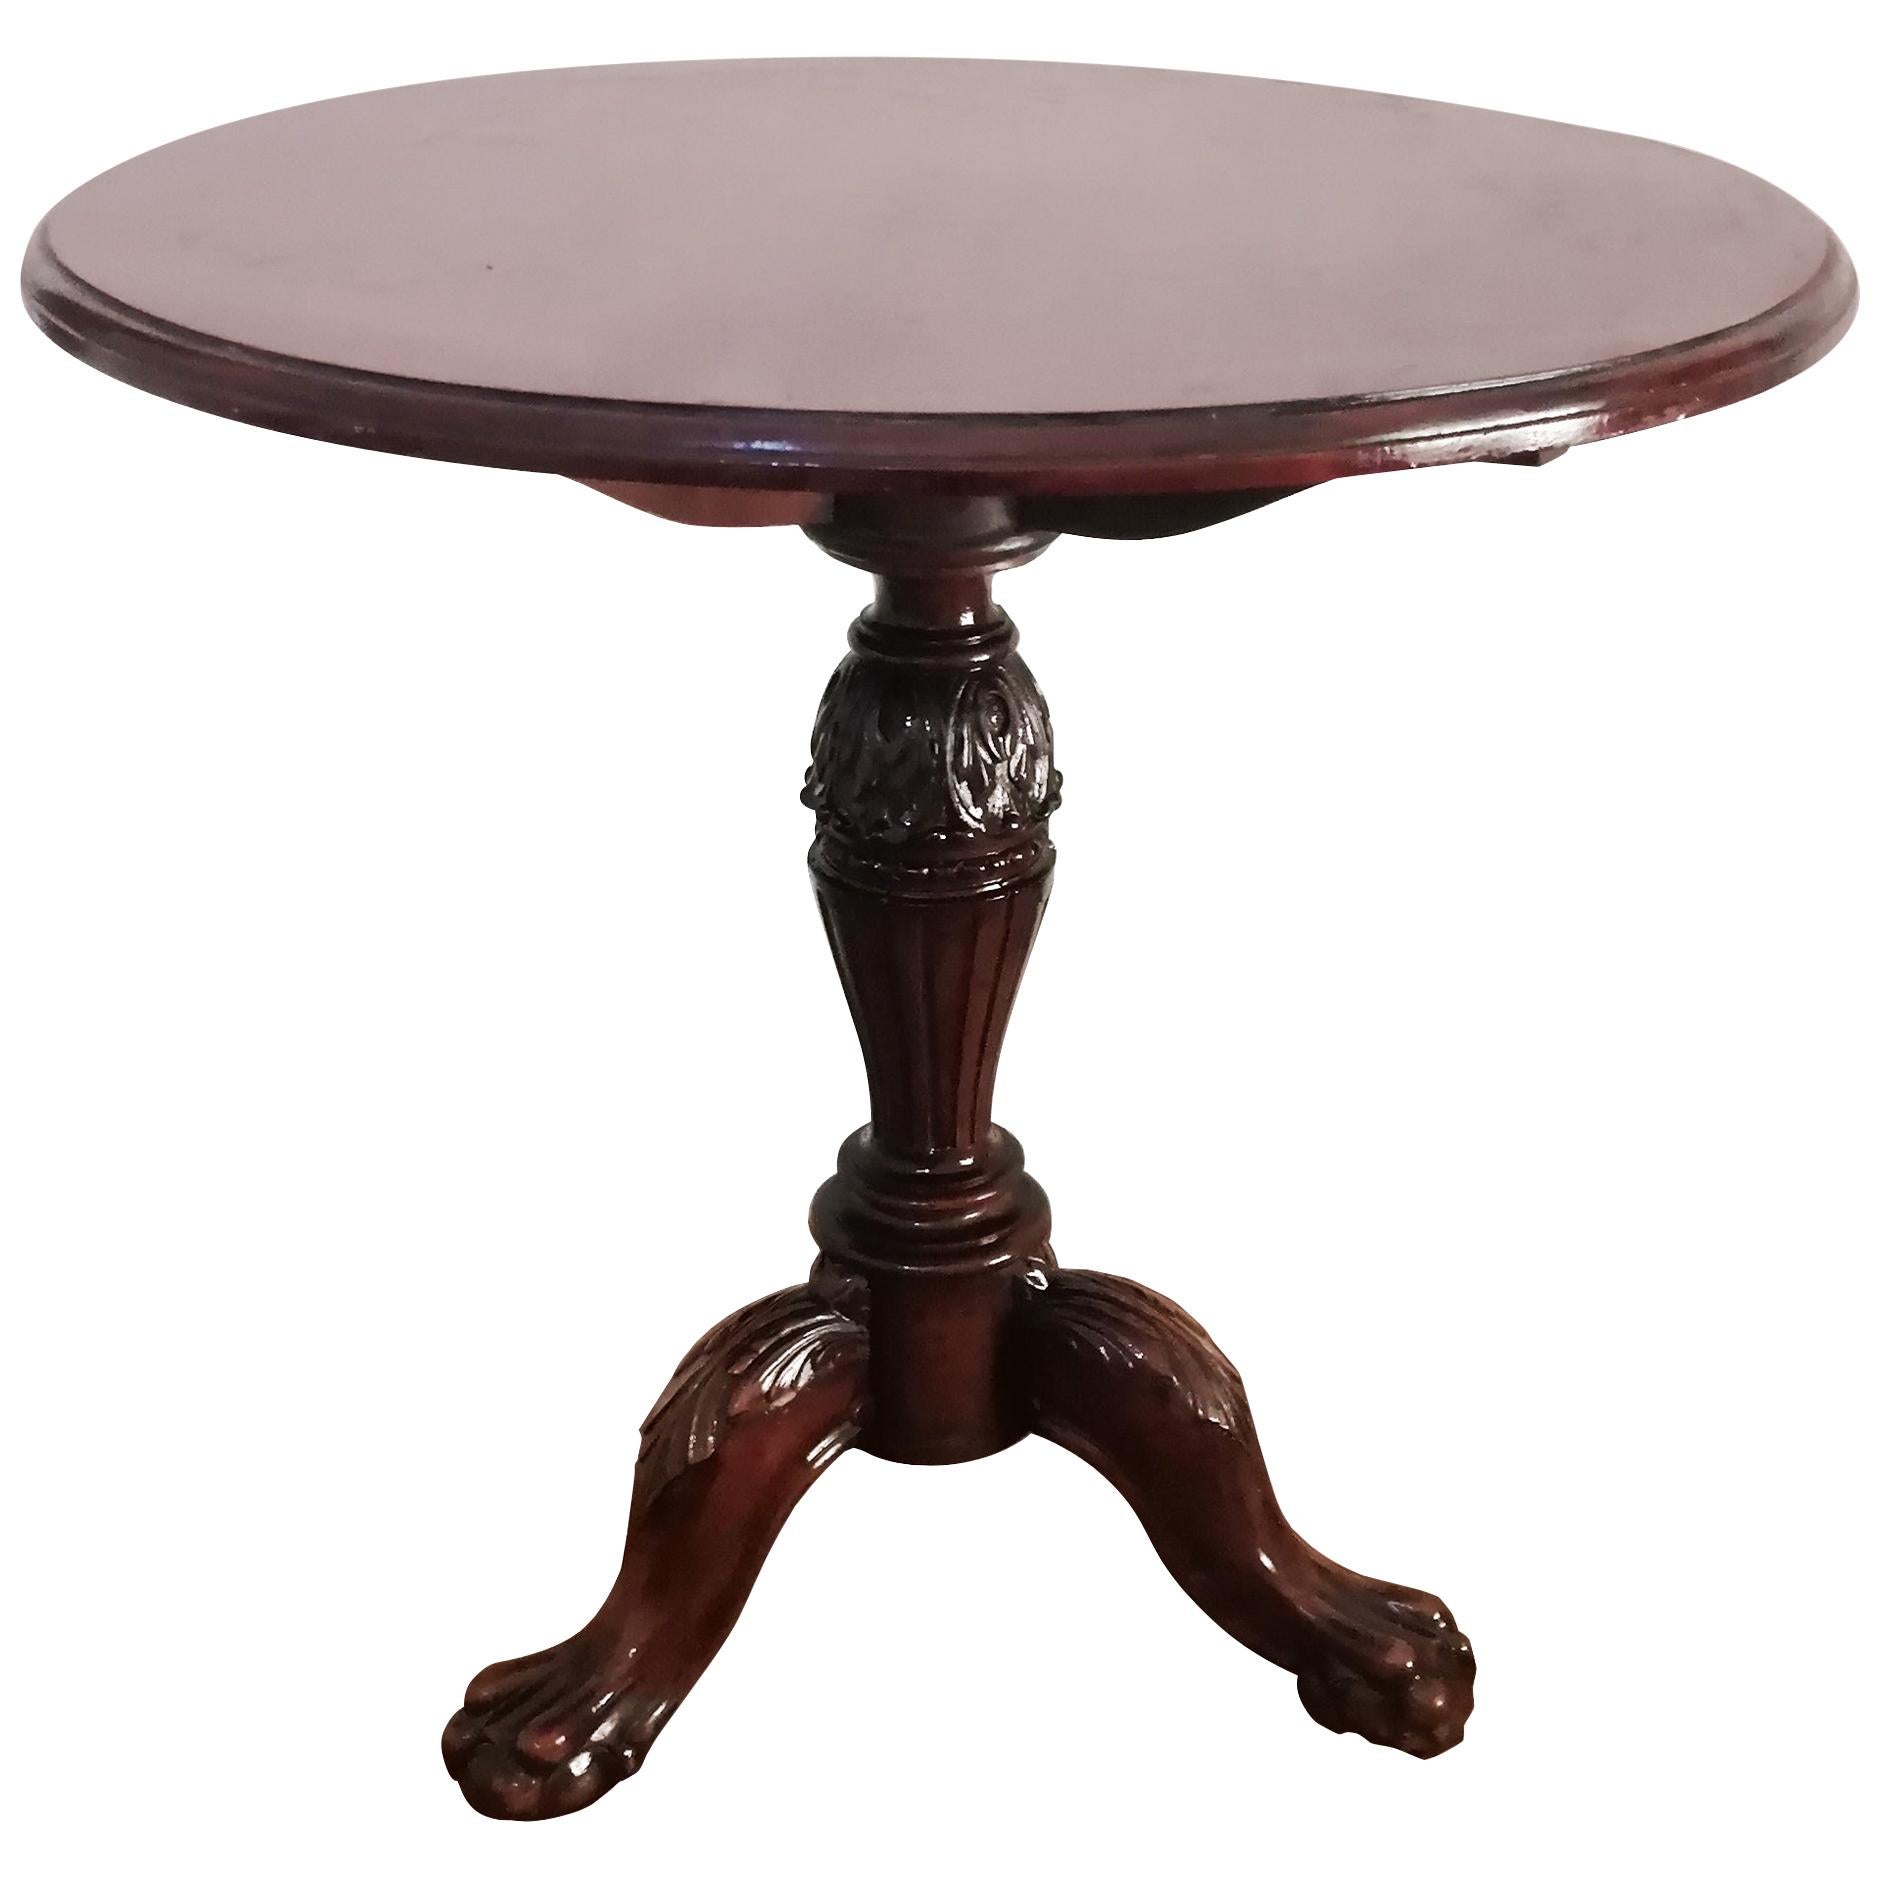 Large Side Table Round Tripod-Shaped with Lion-Shaped Legs